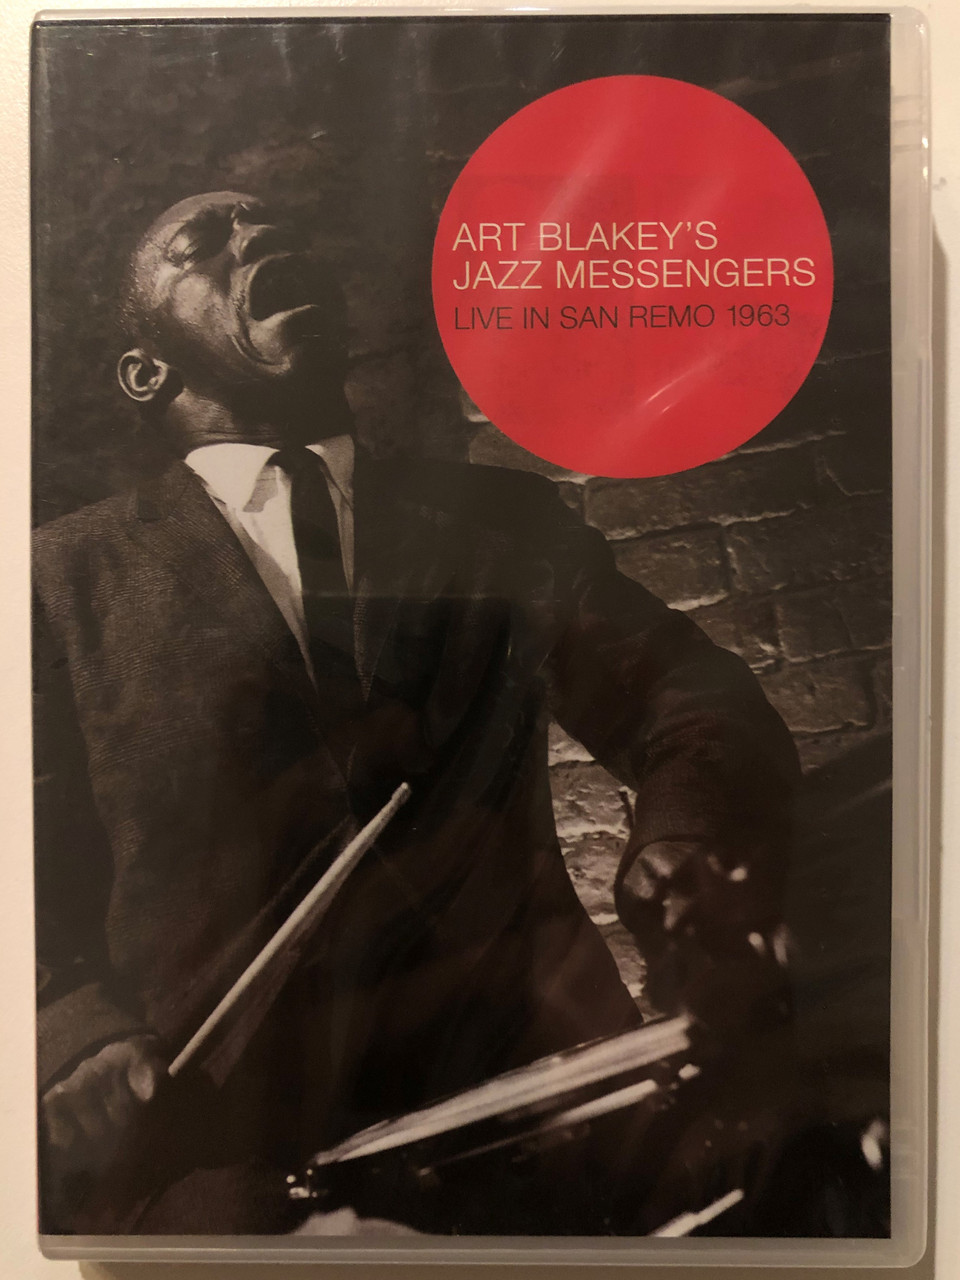 Art_Blakey_The_Jazz_Messengers_Live_In_San_Remo_1963_mpro-Jazz_FOR_THE_FIRST_TIME_EVER_ON_DVD_Including_Jackie_McLean_Lee_Morgan_Donald_Byrd_Benny_Golson_Bobby_Timmons___74231.1692012954.1280.1280.JPG (960×1280)